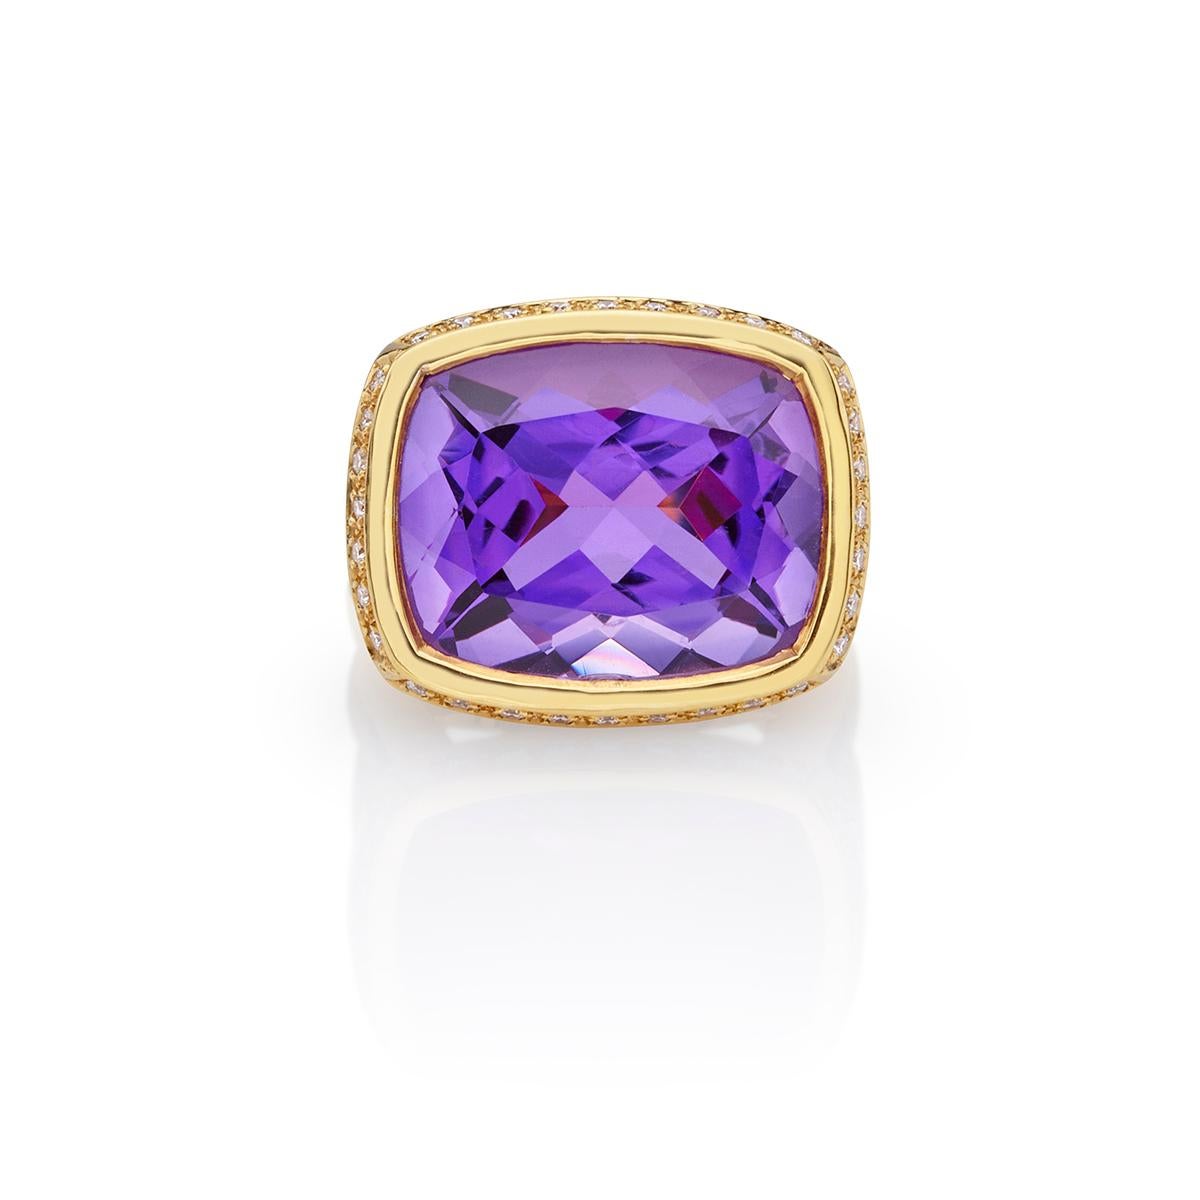 Sublime 18 Kt yellow gold ring set with an exquisite Amethyst and brilliant cut diamonds . The unique and rare colour of the stone leads you to divine purple sea. A statement ring and a conversation piece.

Amethyst 20,00ct, and Brilliant Cut